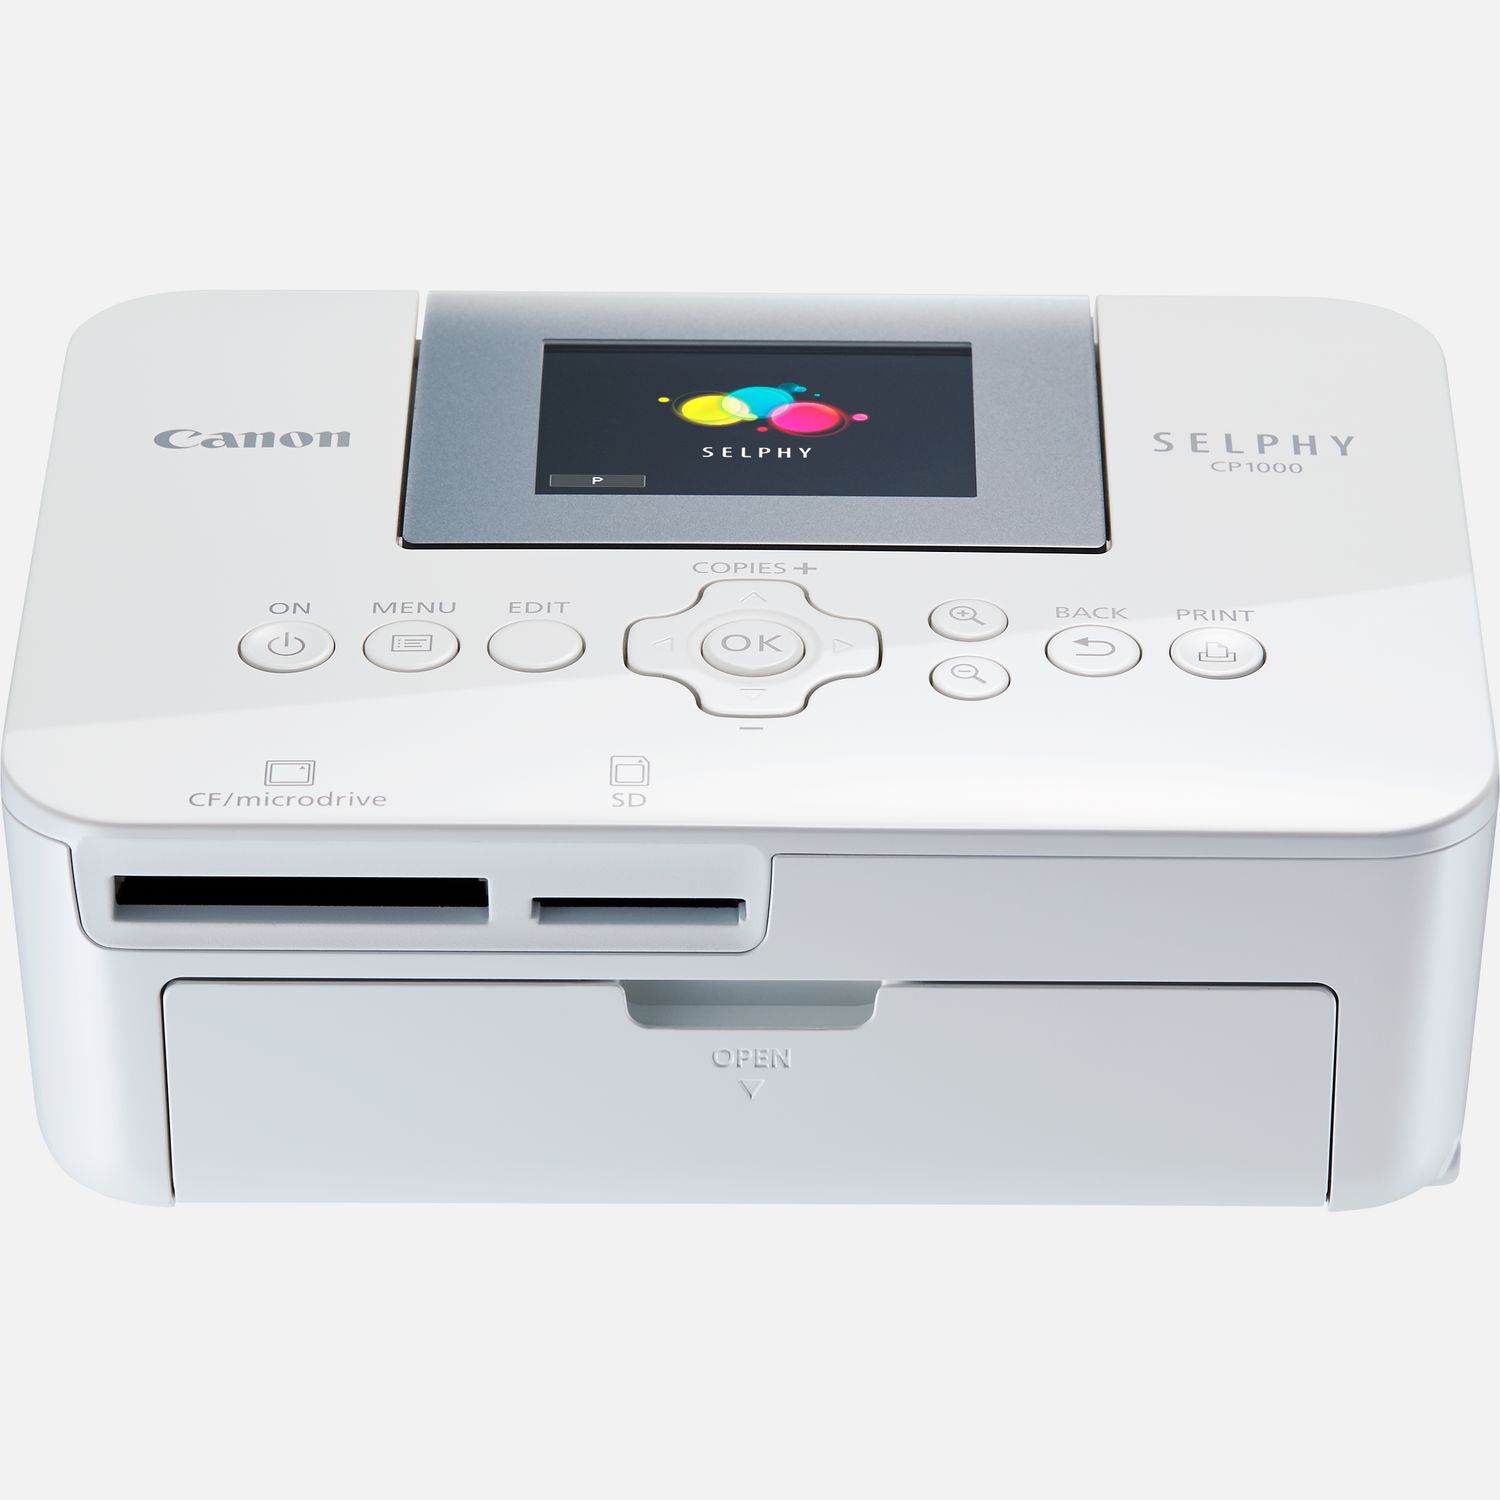 Canon Selphy CP1000 Compact Photo Printer White with 3 KP-108IN